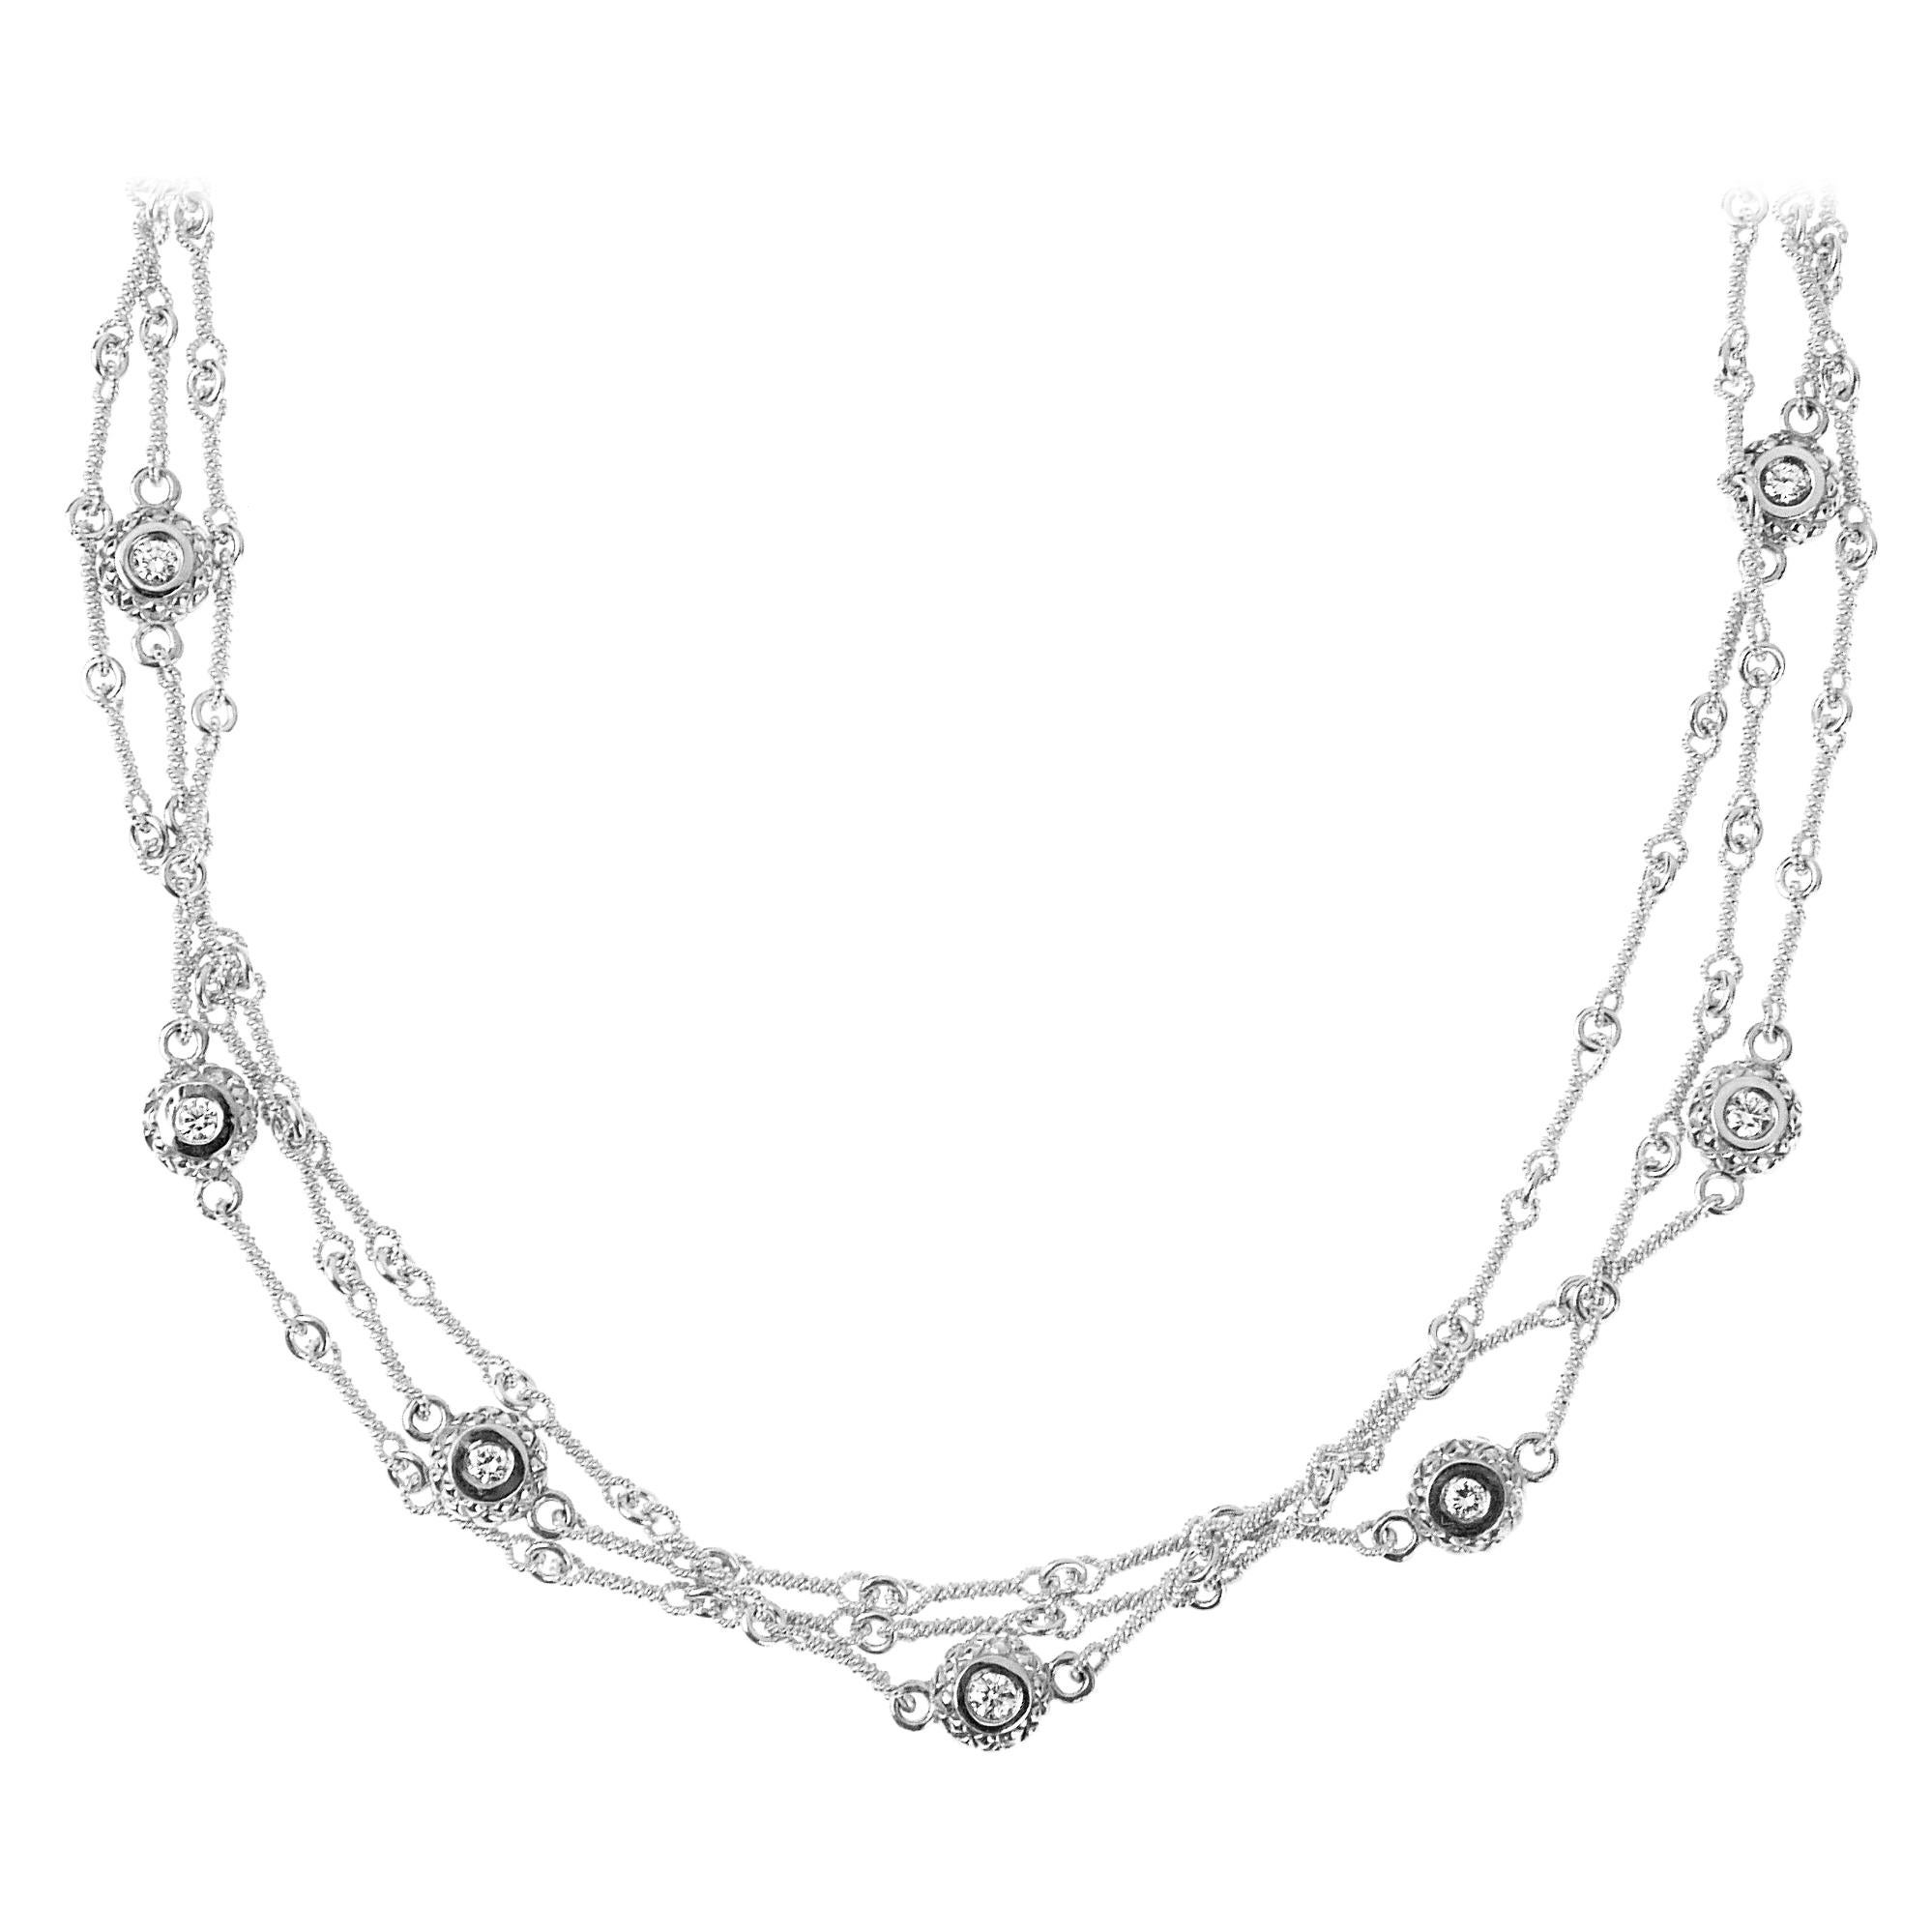 Stambolian White Gold Three-Link Handmade Chain Necklace with Diamond Bezels